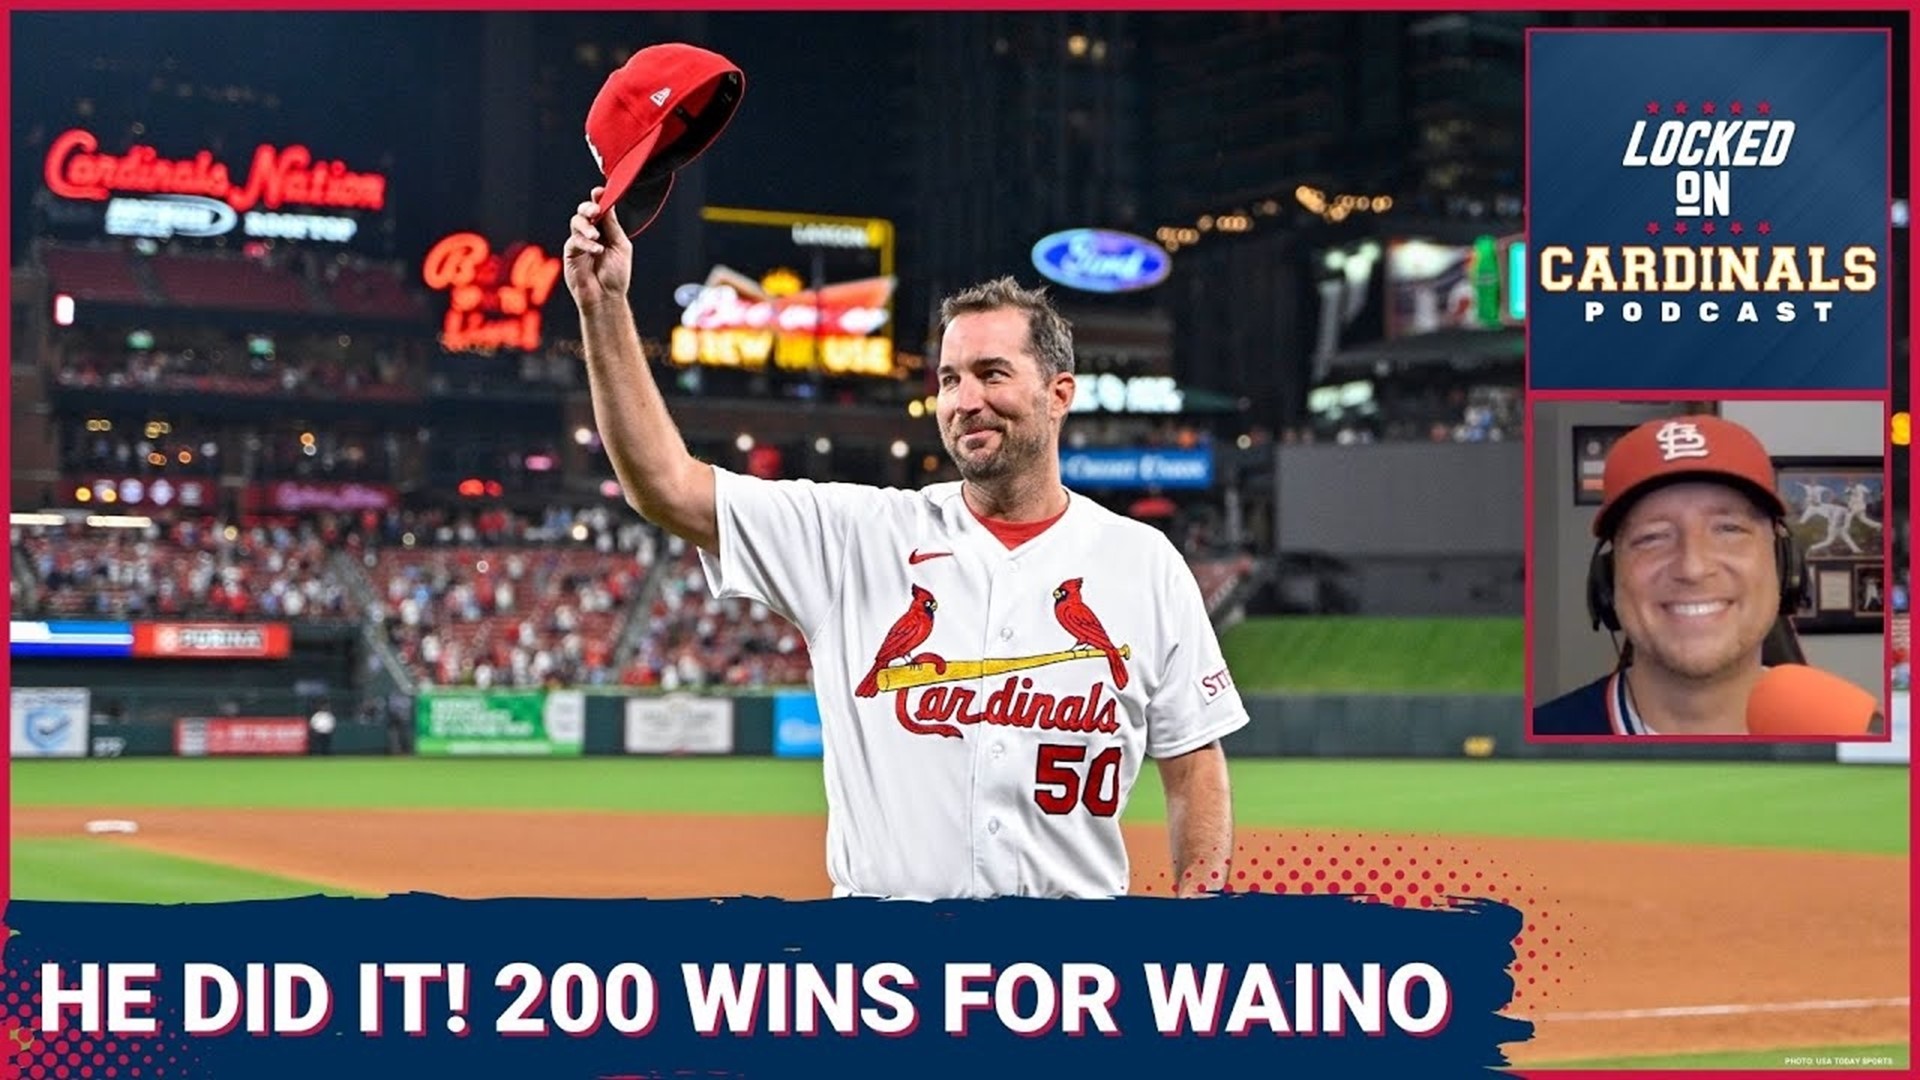 The St. Louis Cardinal's Adam Wainwright Gets His 200th Career Win On A Magical Night At Busch